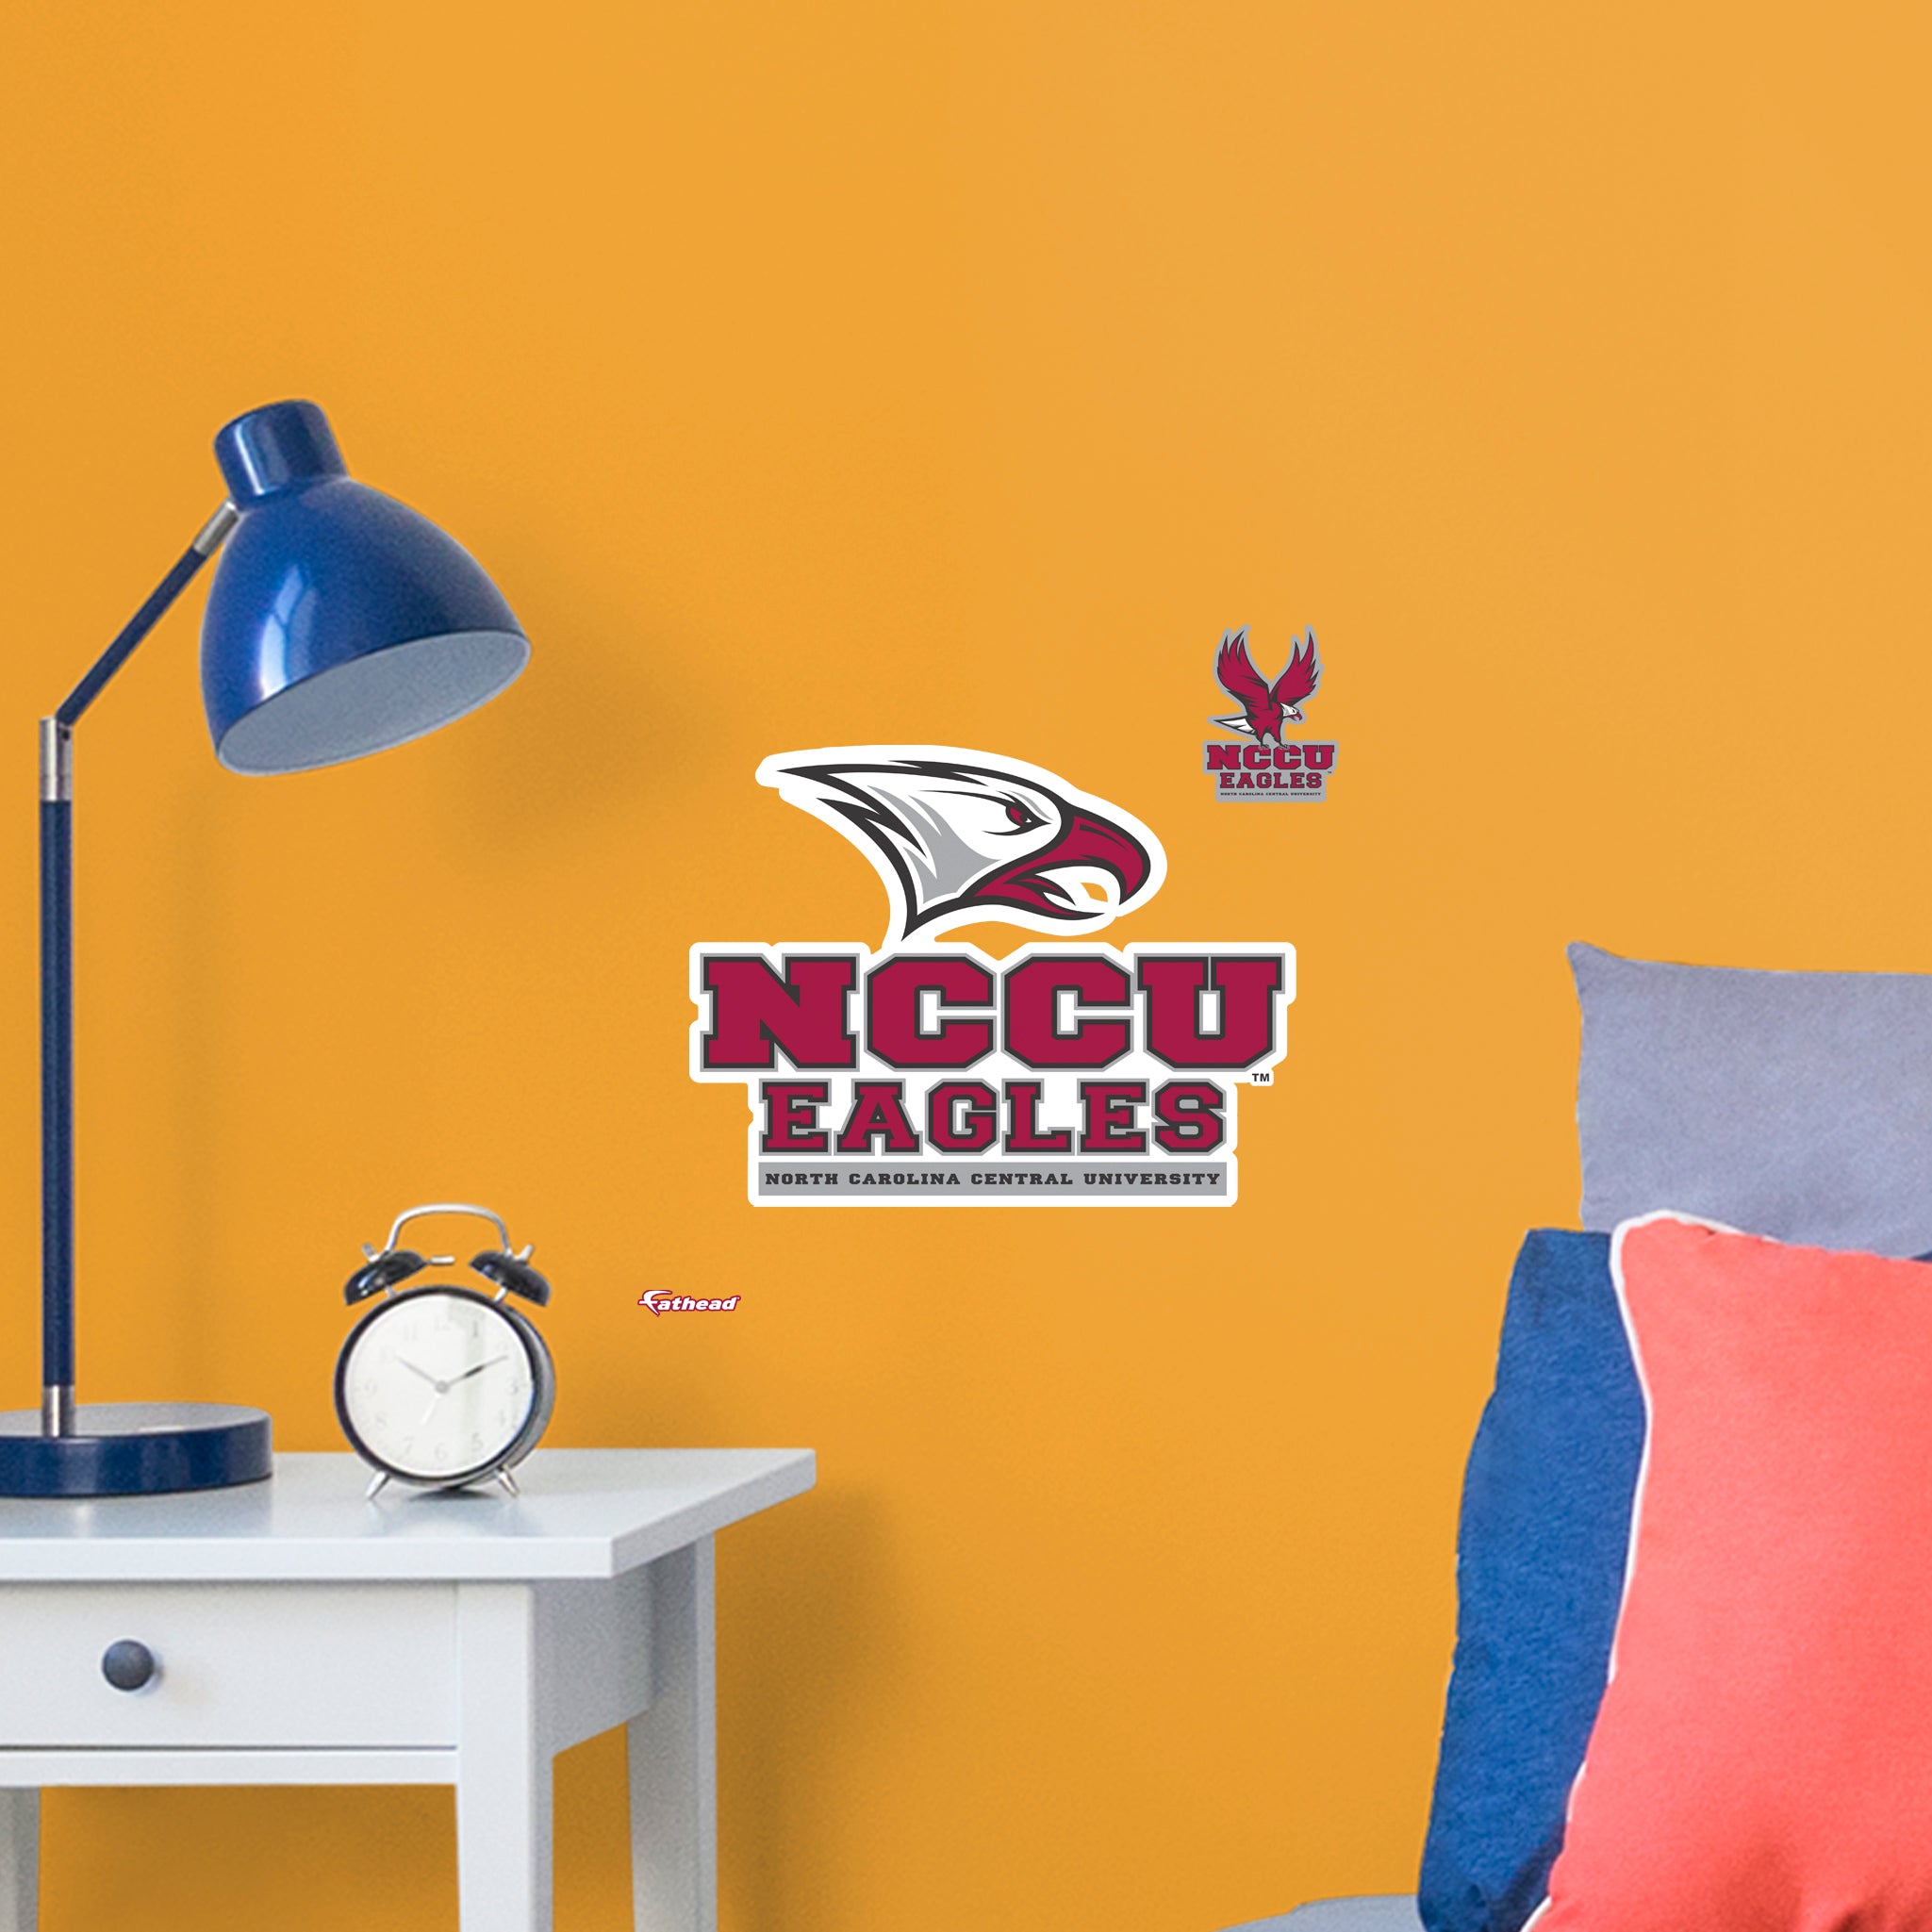 North Carolina Central University 2020 Logo - Officially Licensed NCAA Removable Wall Decal Large by Fathead | Vinyl